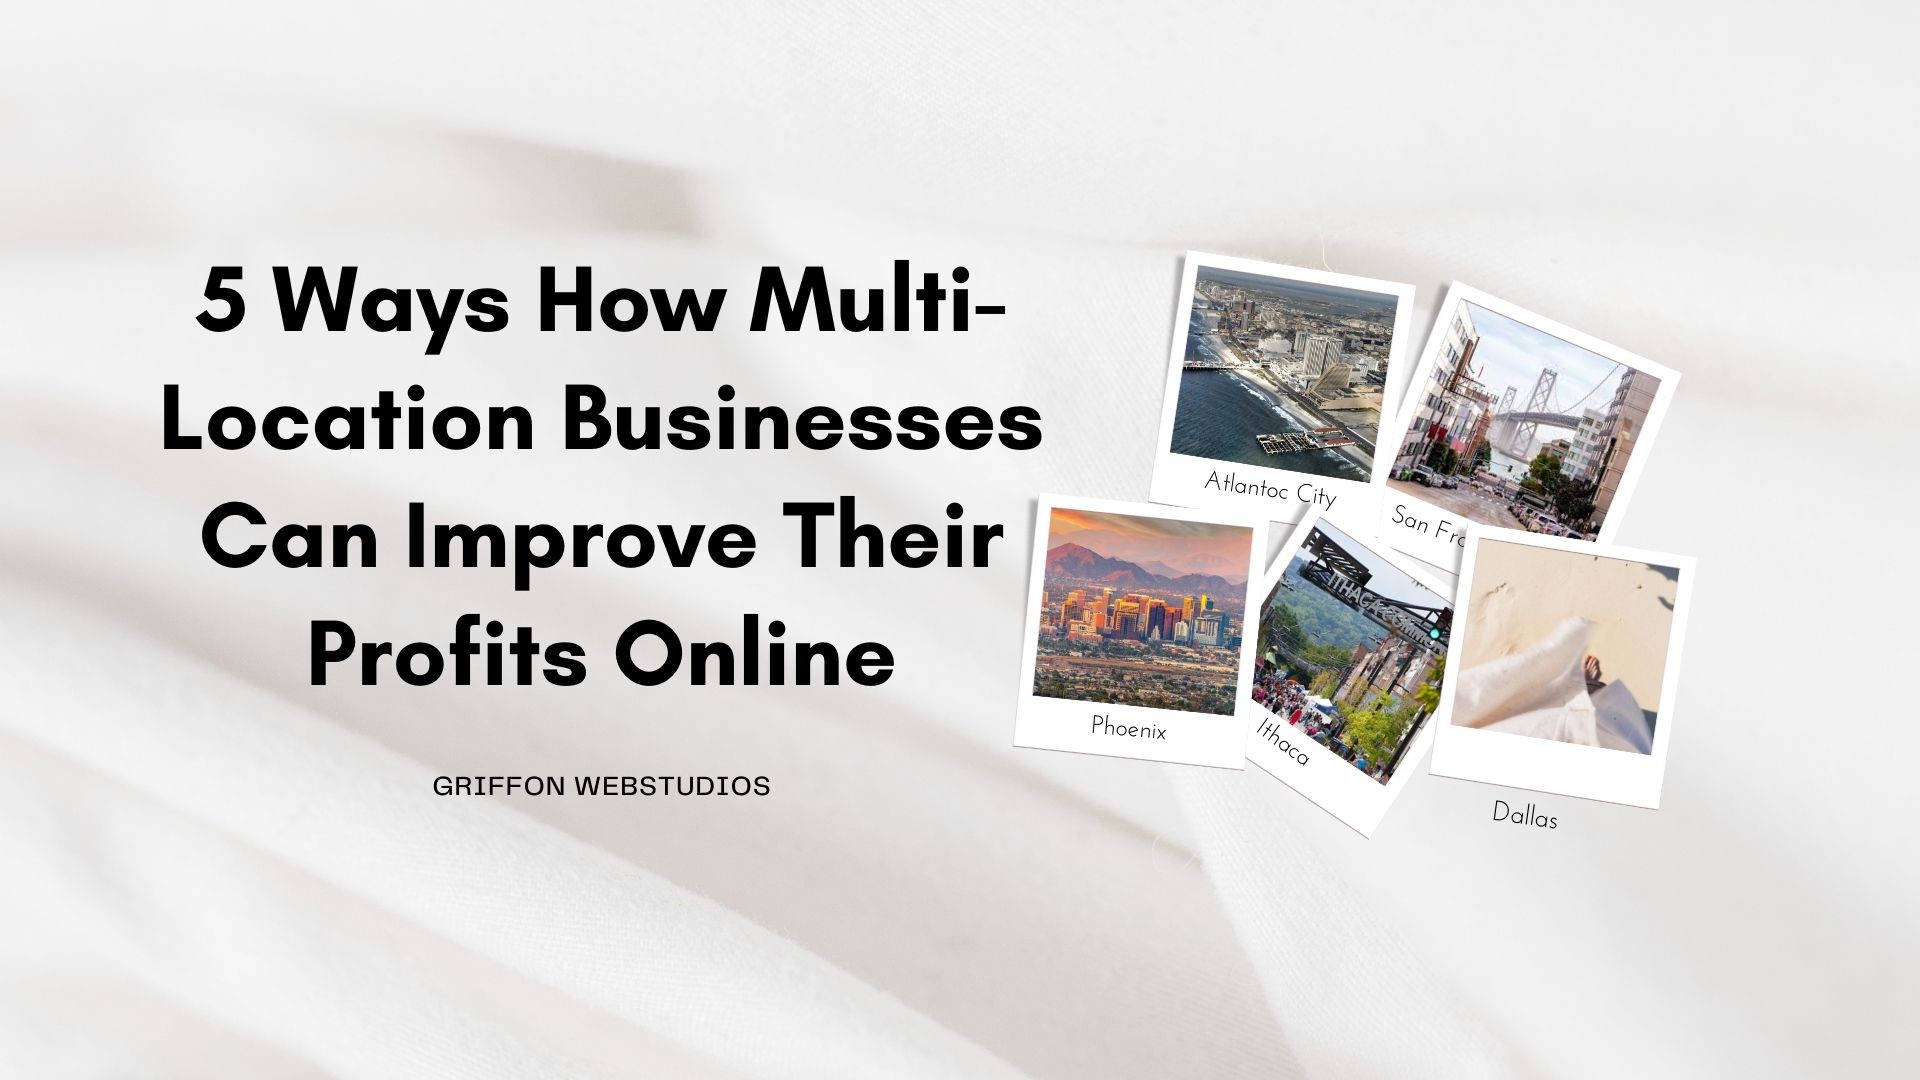 5 Ways How Multi Location Businesses Can Improve Their Profits Online